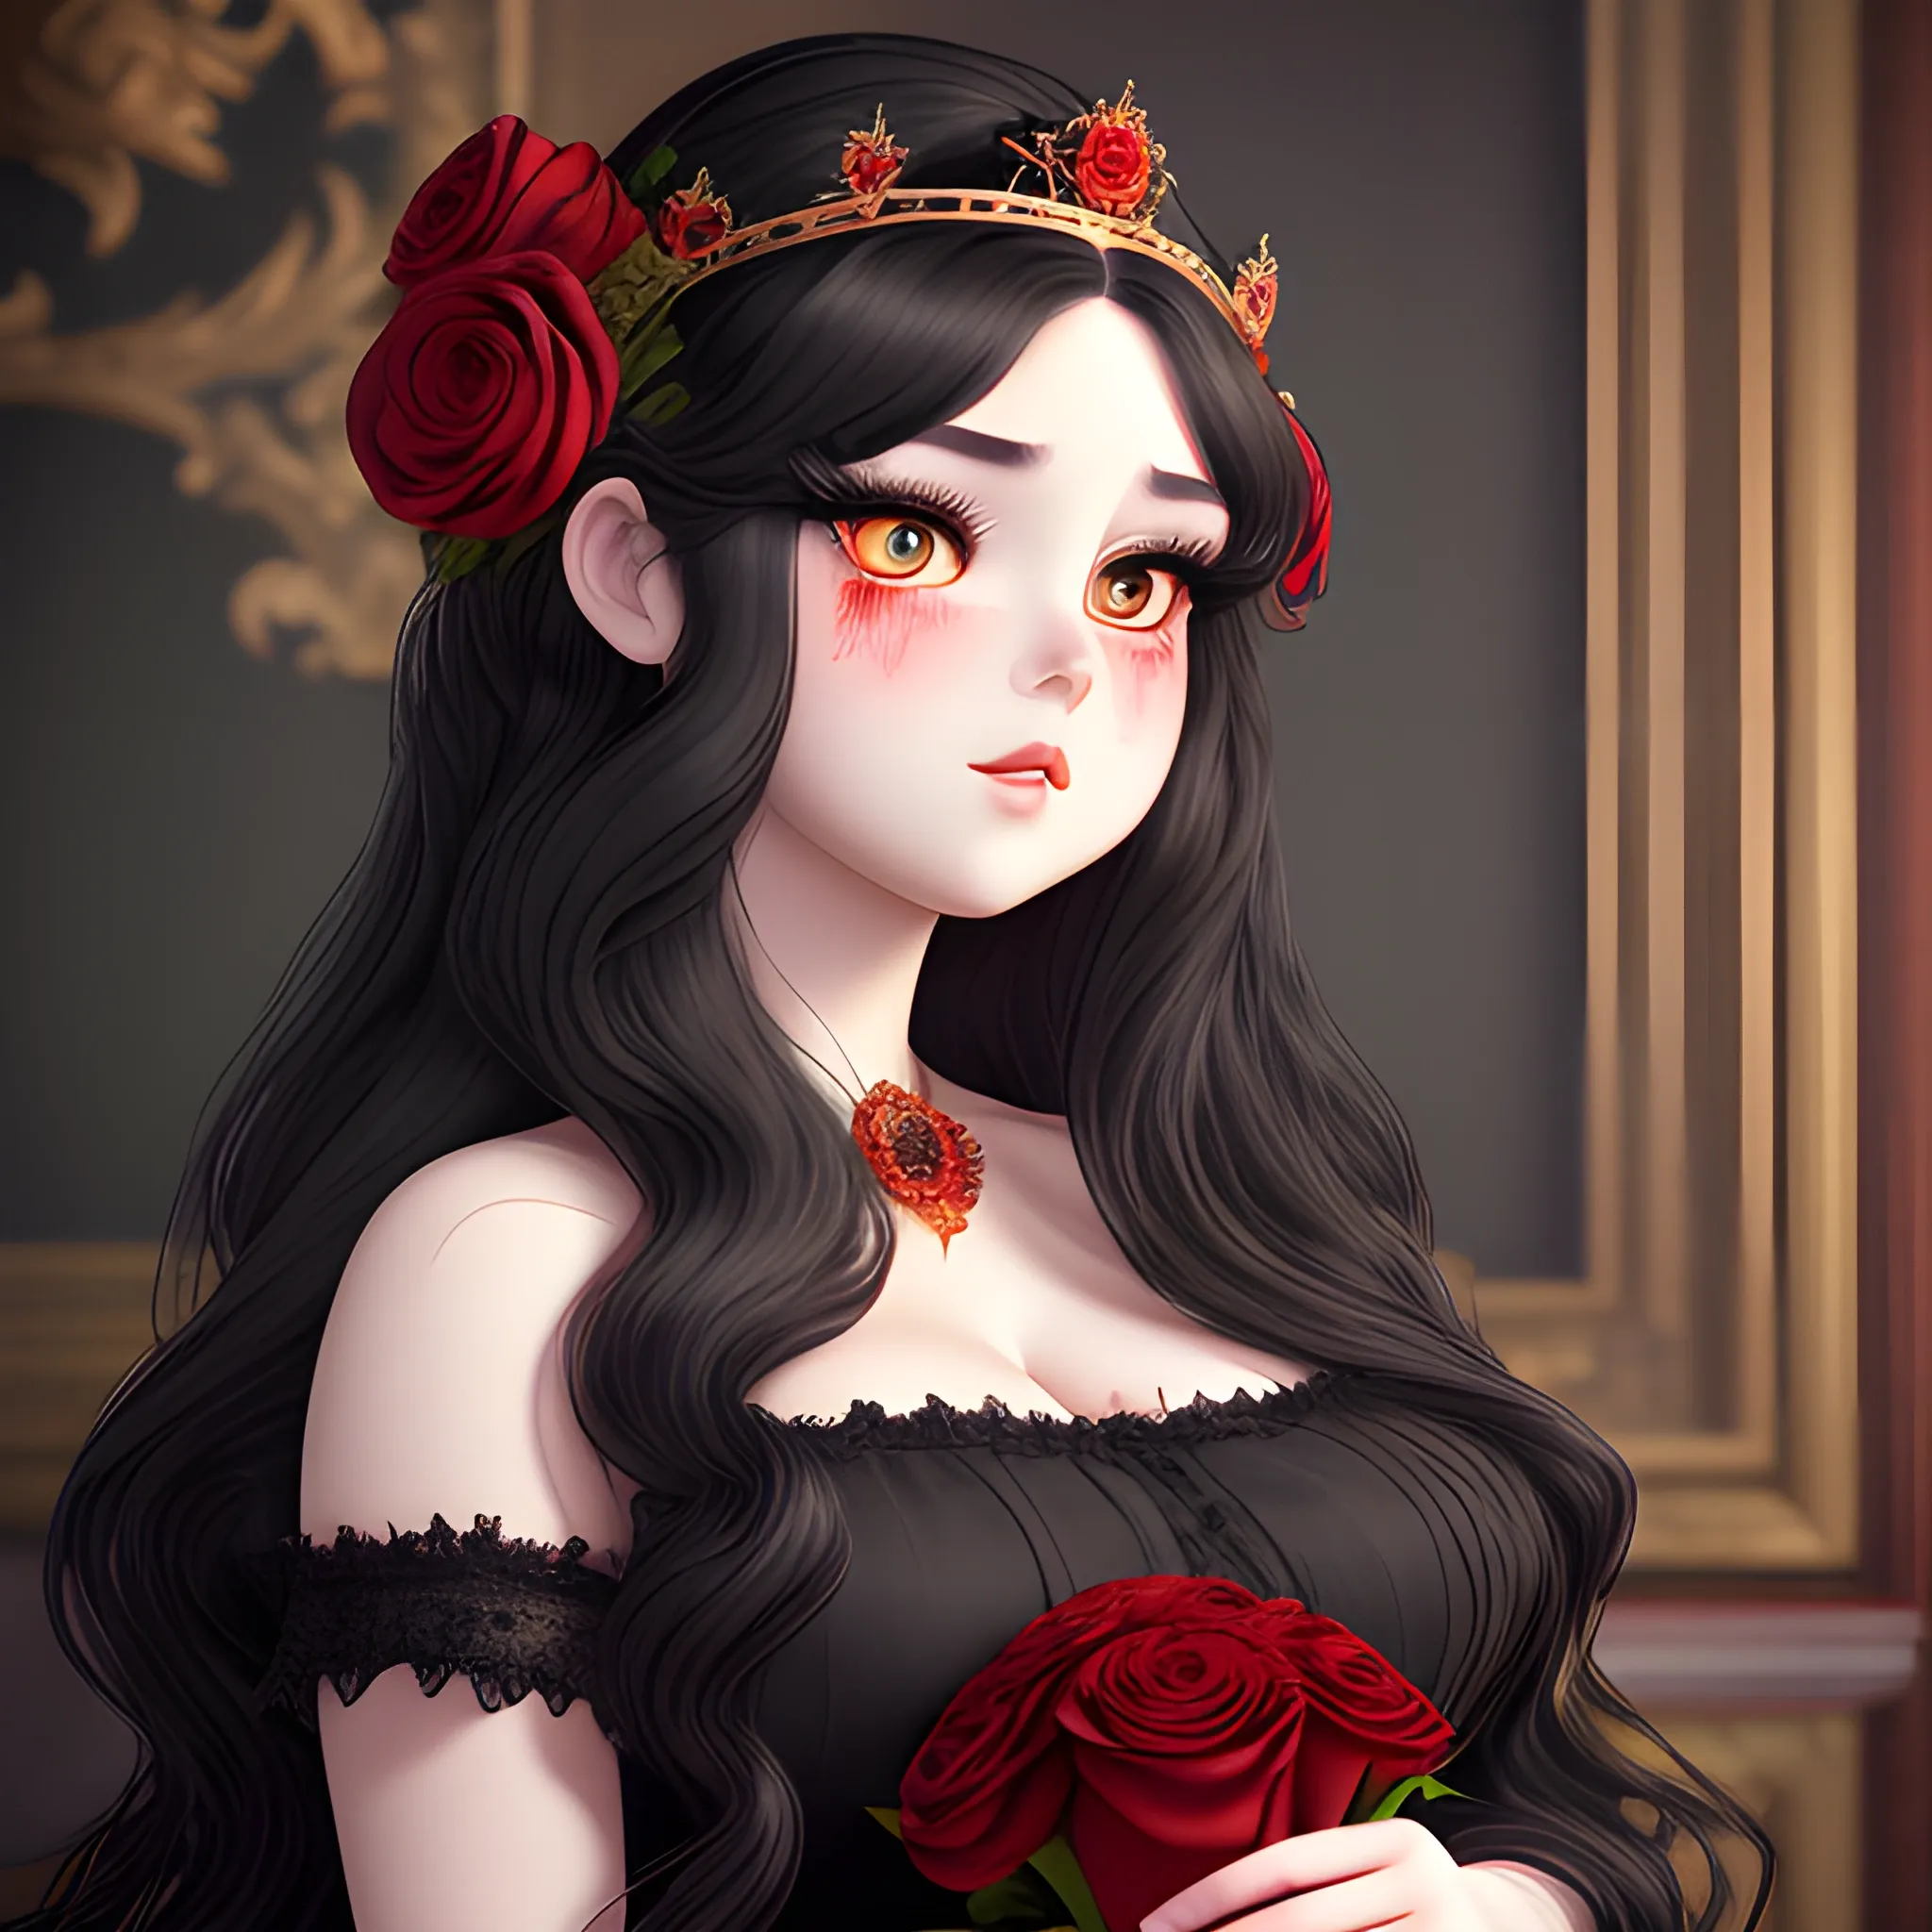 (((high detail))), best quality, Warm Colors, (detailed), (high resolution)Black long-haired female adult, full body, curvy face, with rosy cheeks, big black eyes, thick eyelashes, thick peach lips, thick eyebrows,  with a black and red dress holding a bloody crown in her hand, roses of backround , wallper  , 